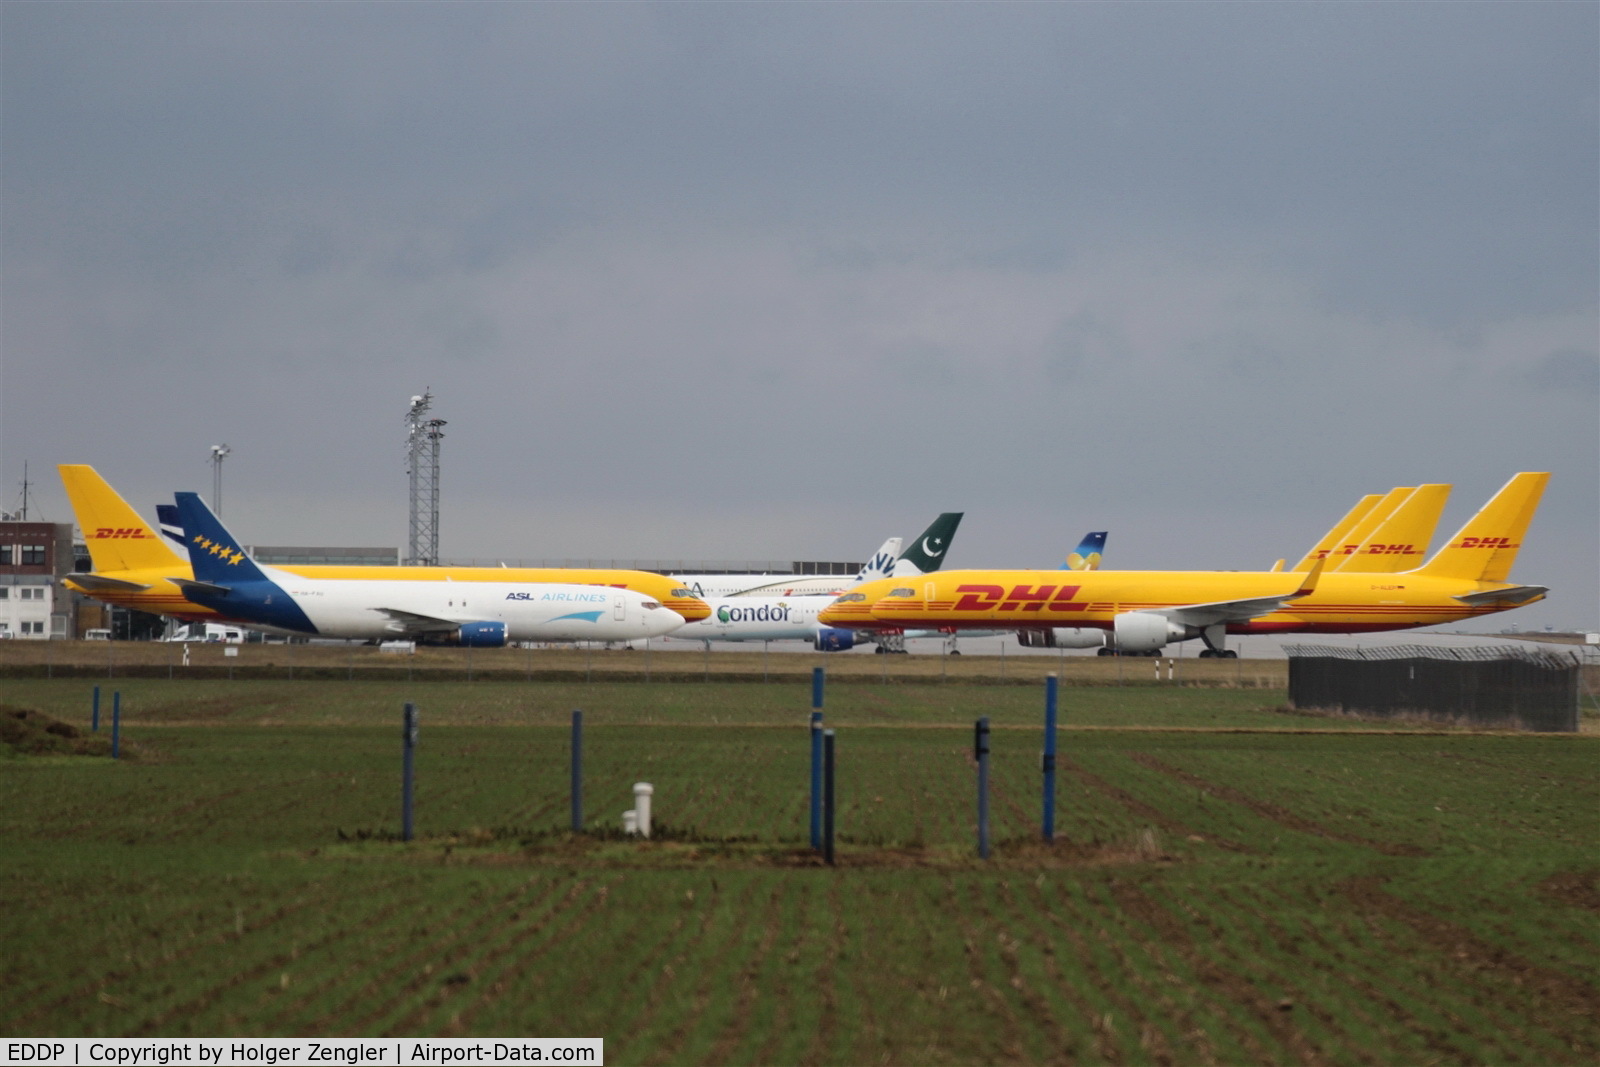 Leipzig/Halle Airport, Leipzig/Halle Germany (EDDP) - Apron 1 west is normally unusual for freighters on LEJ